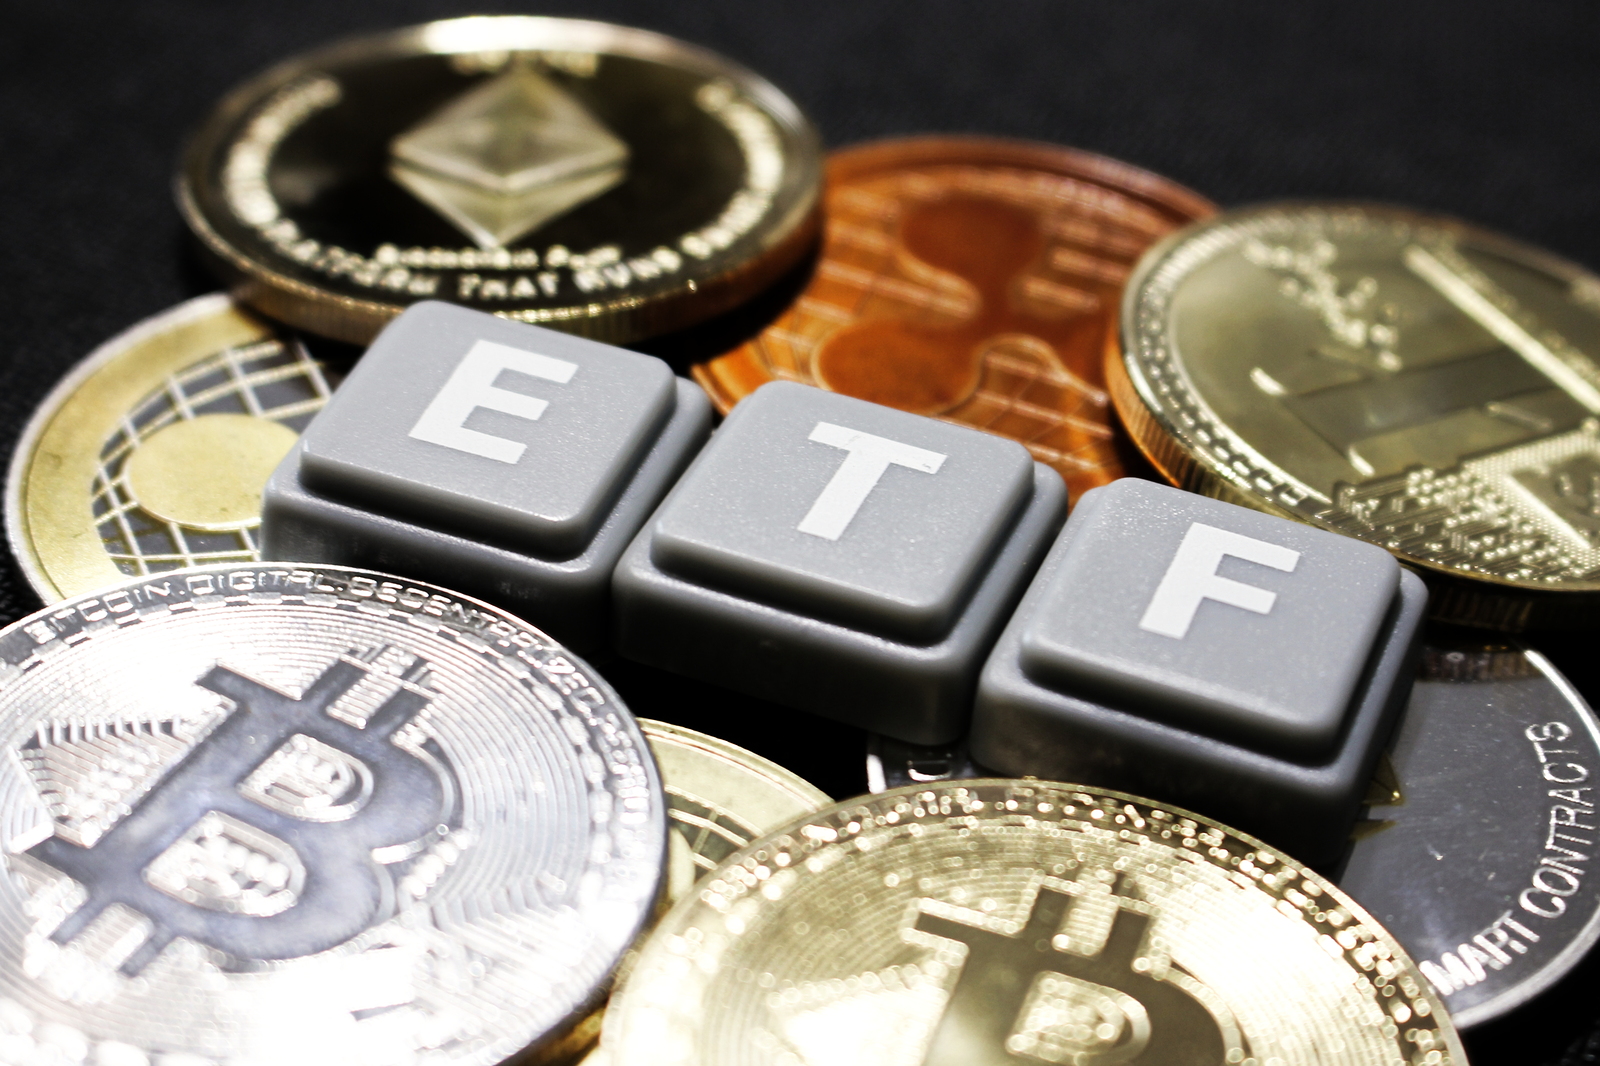 Picture of ETF written with scrabble tiles with crypto coins around it